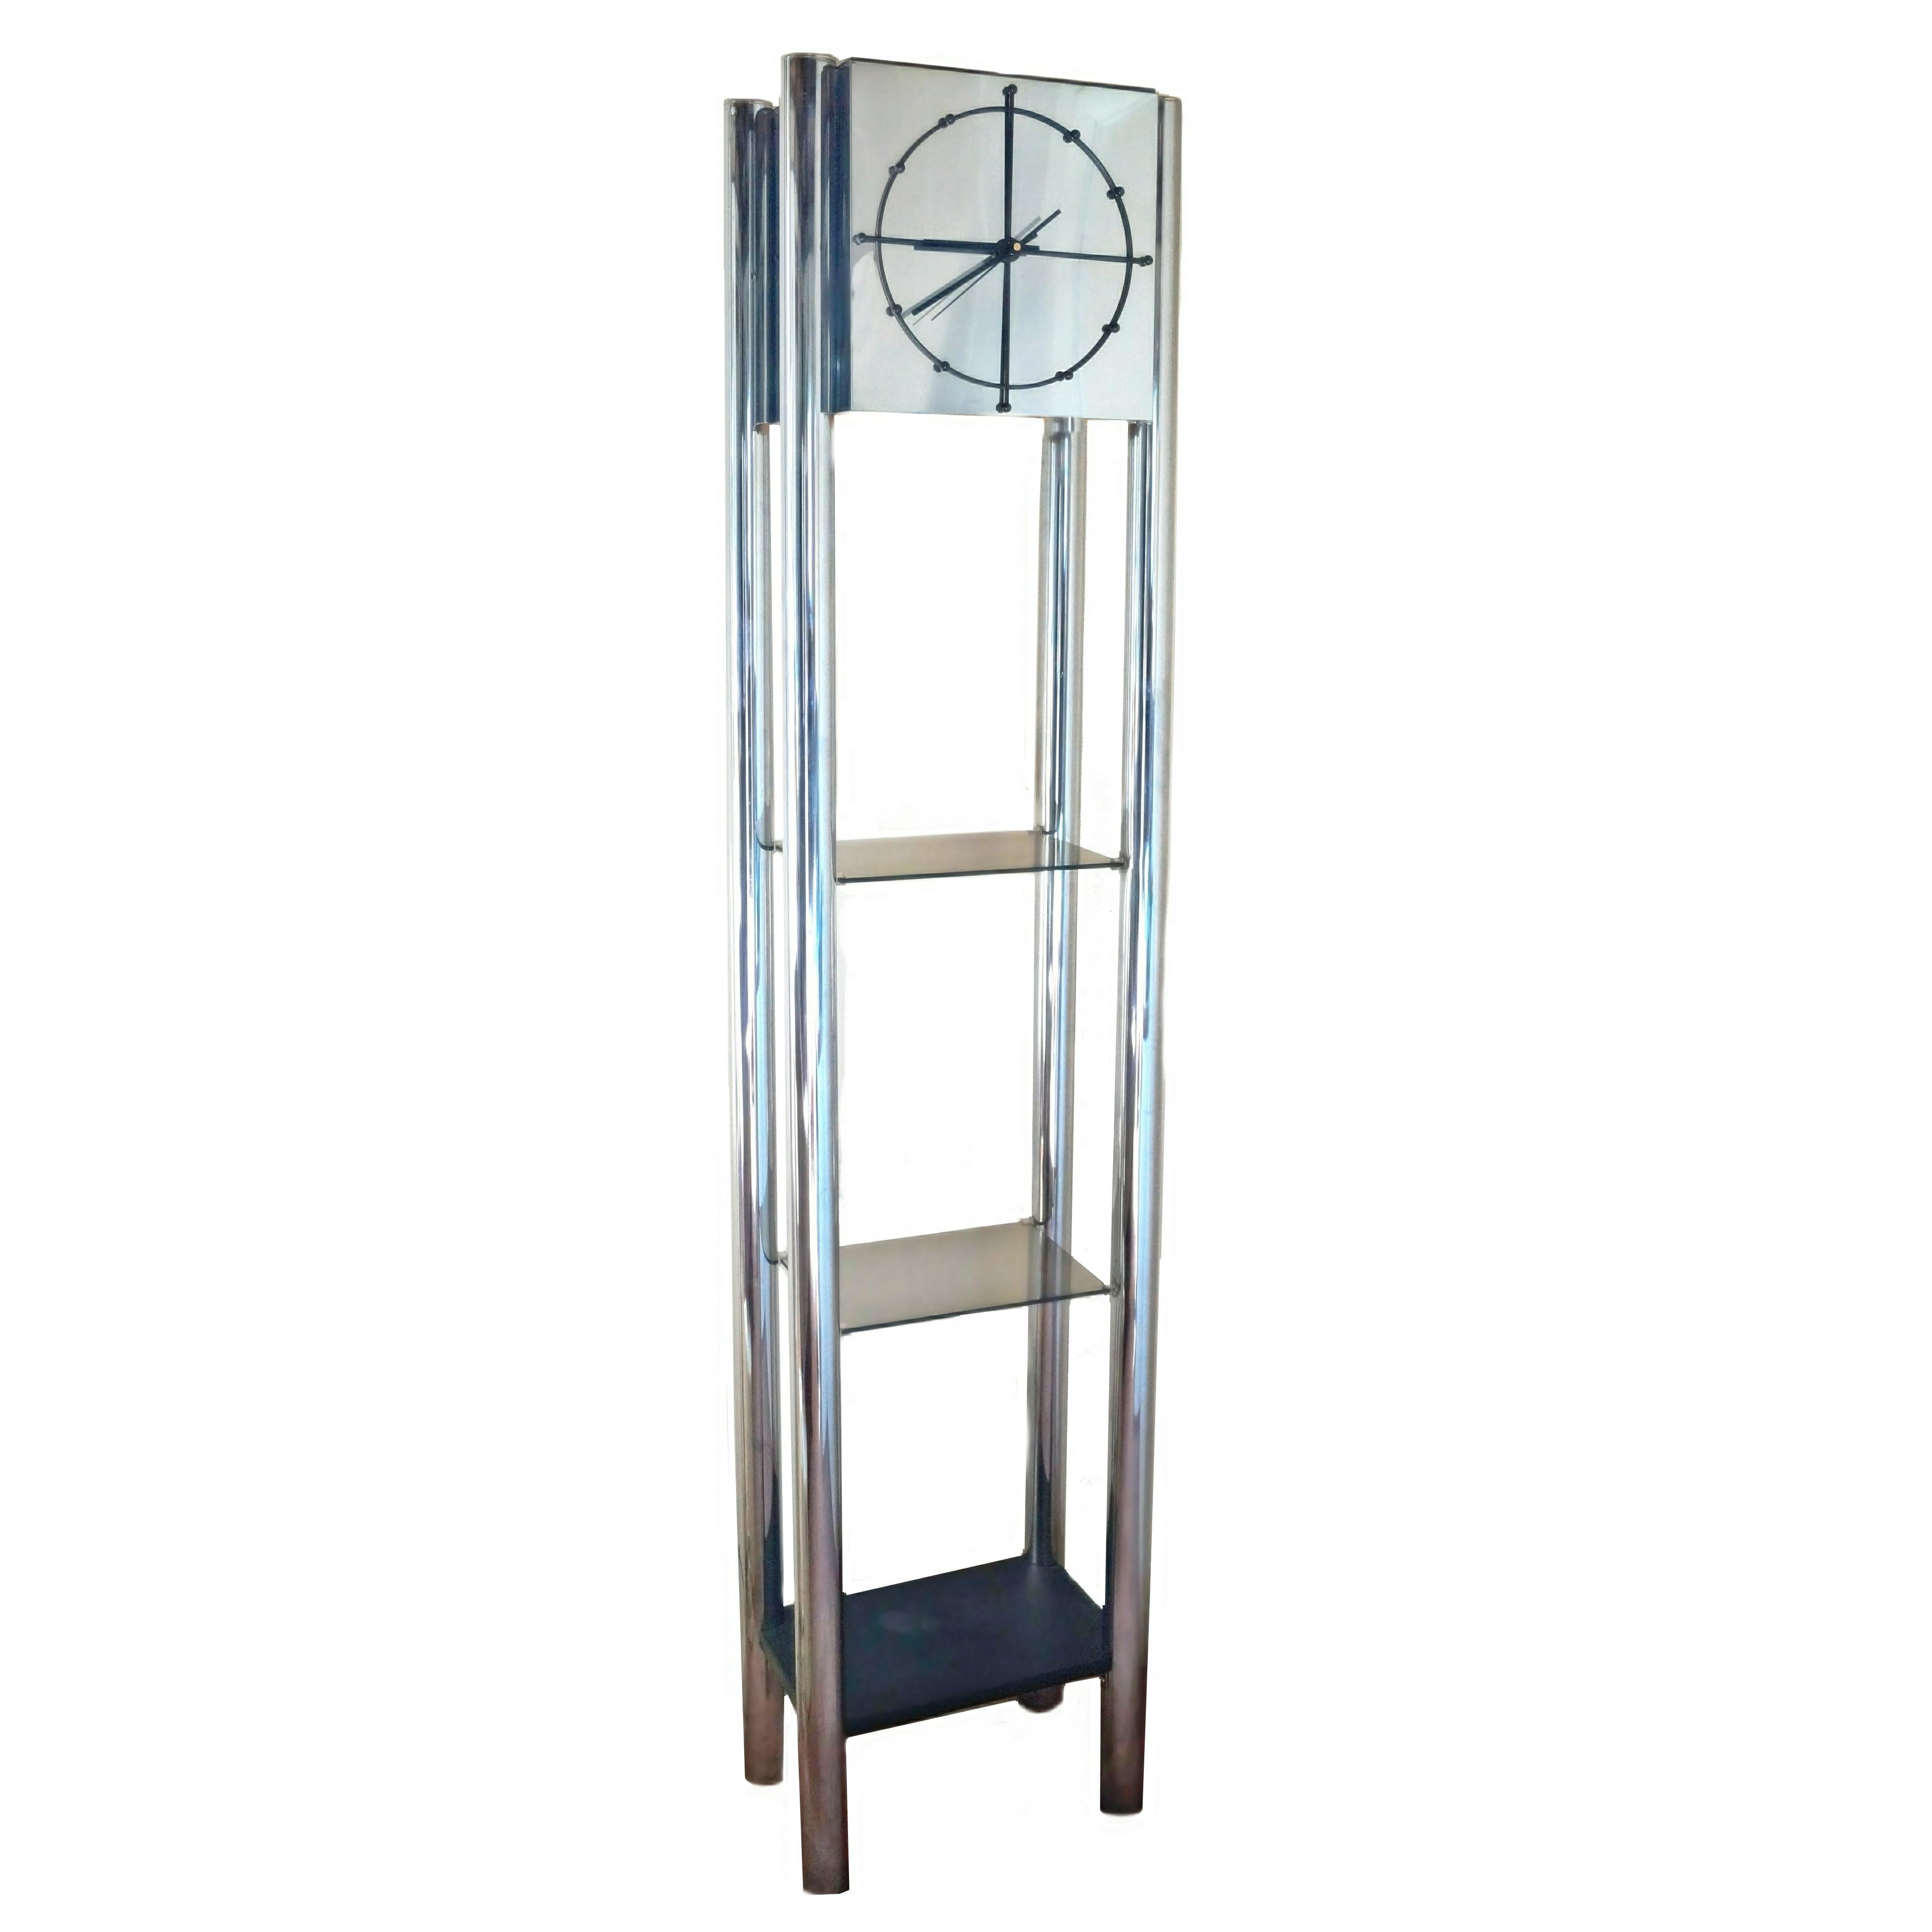 Modern chrome standing open grandfather fall clock étagère. This modern clock has three shelves, two in glass and the bottom is black. It has an inner downlight to highlight the glass shelves. The clock runs on battery. If you are in the New Jersey